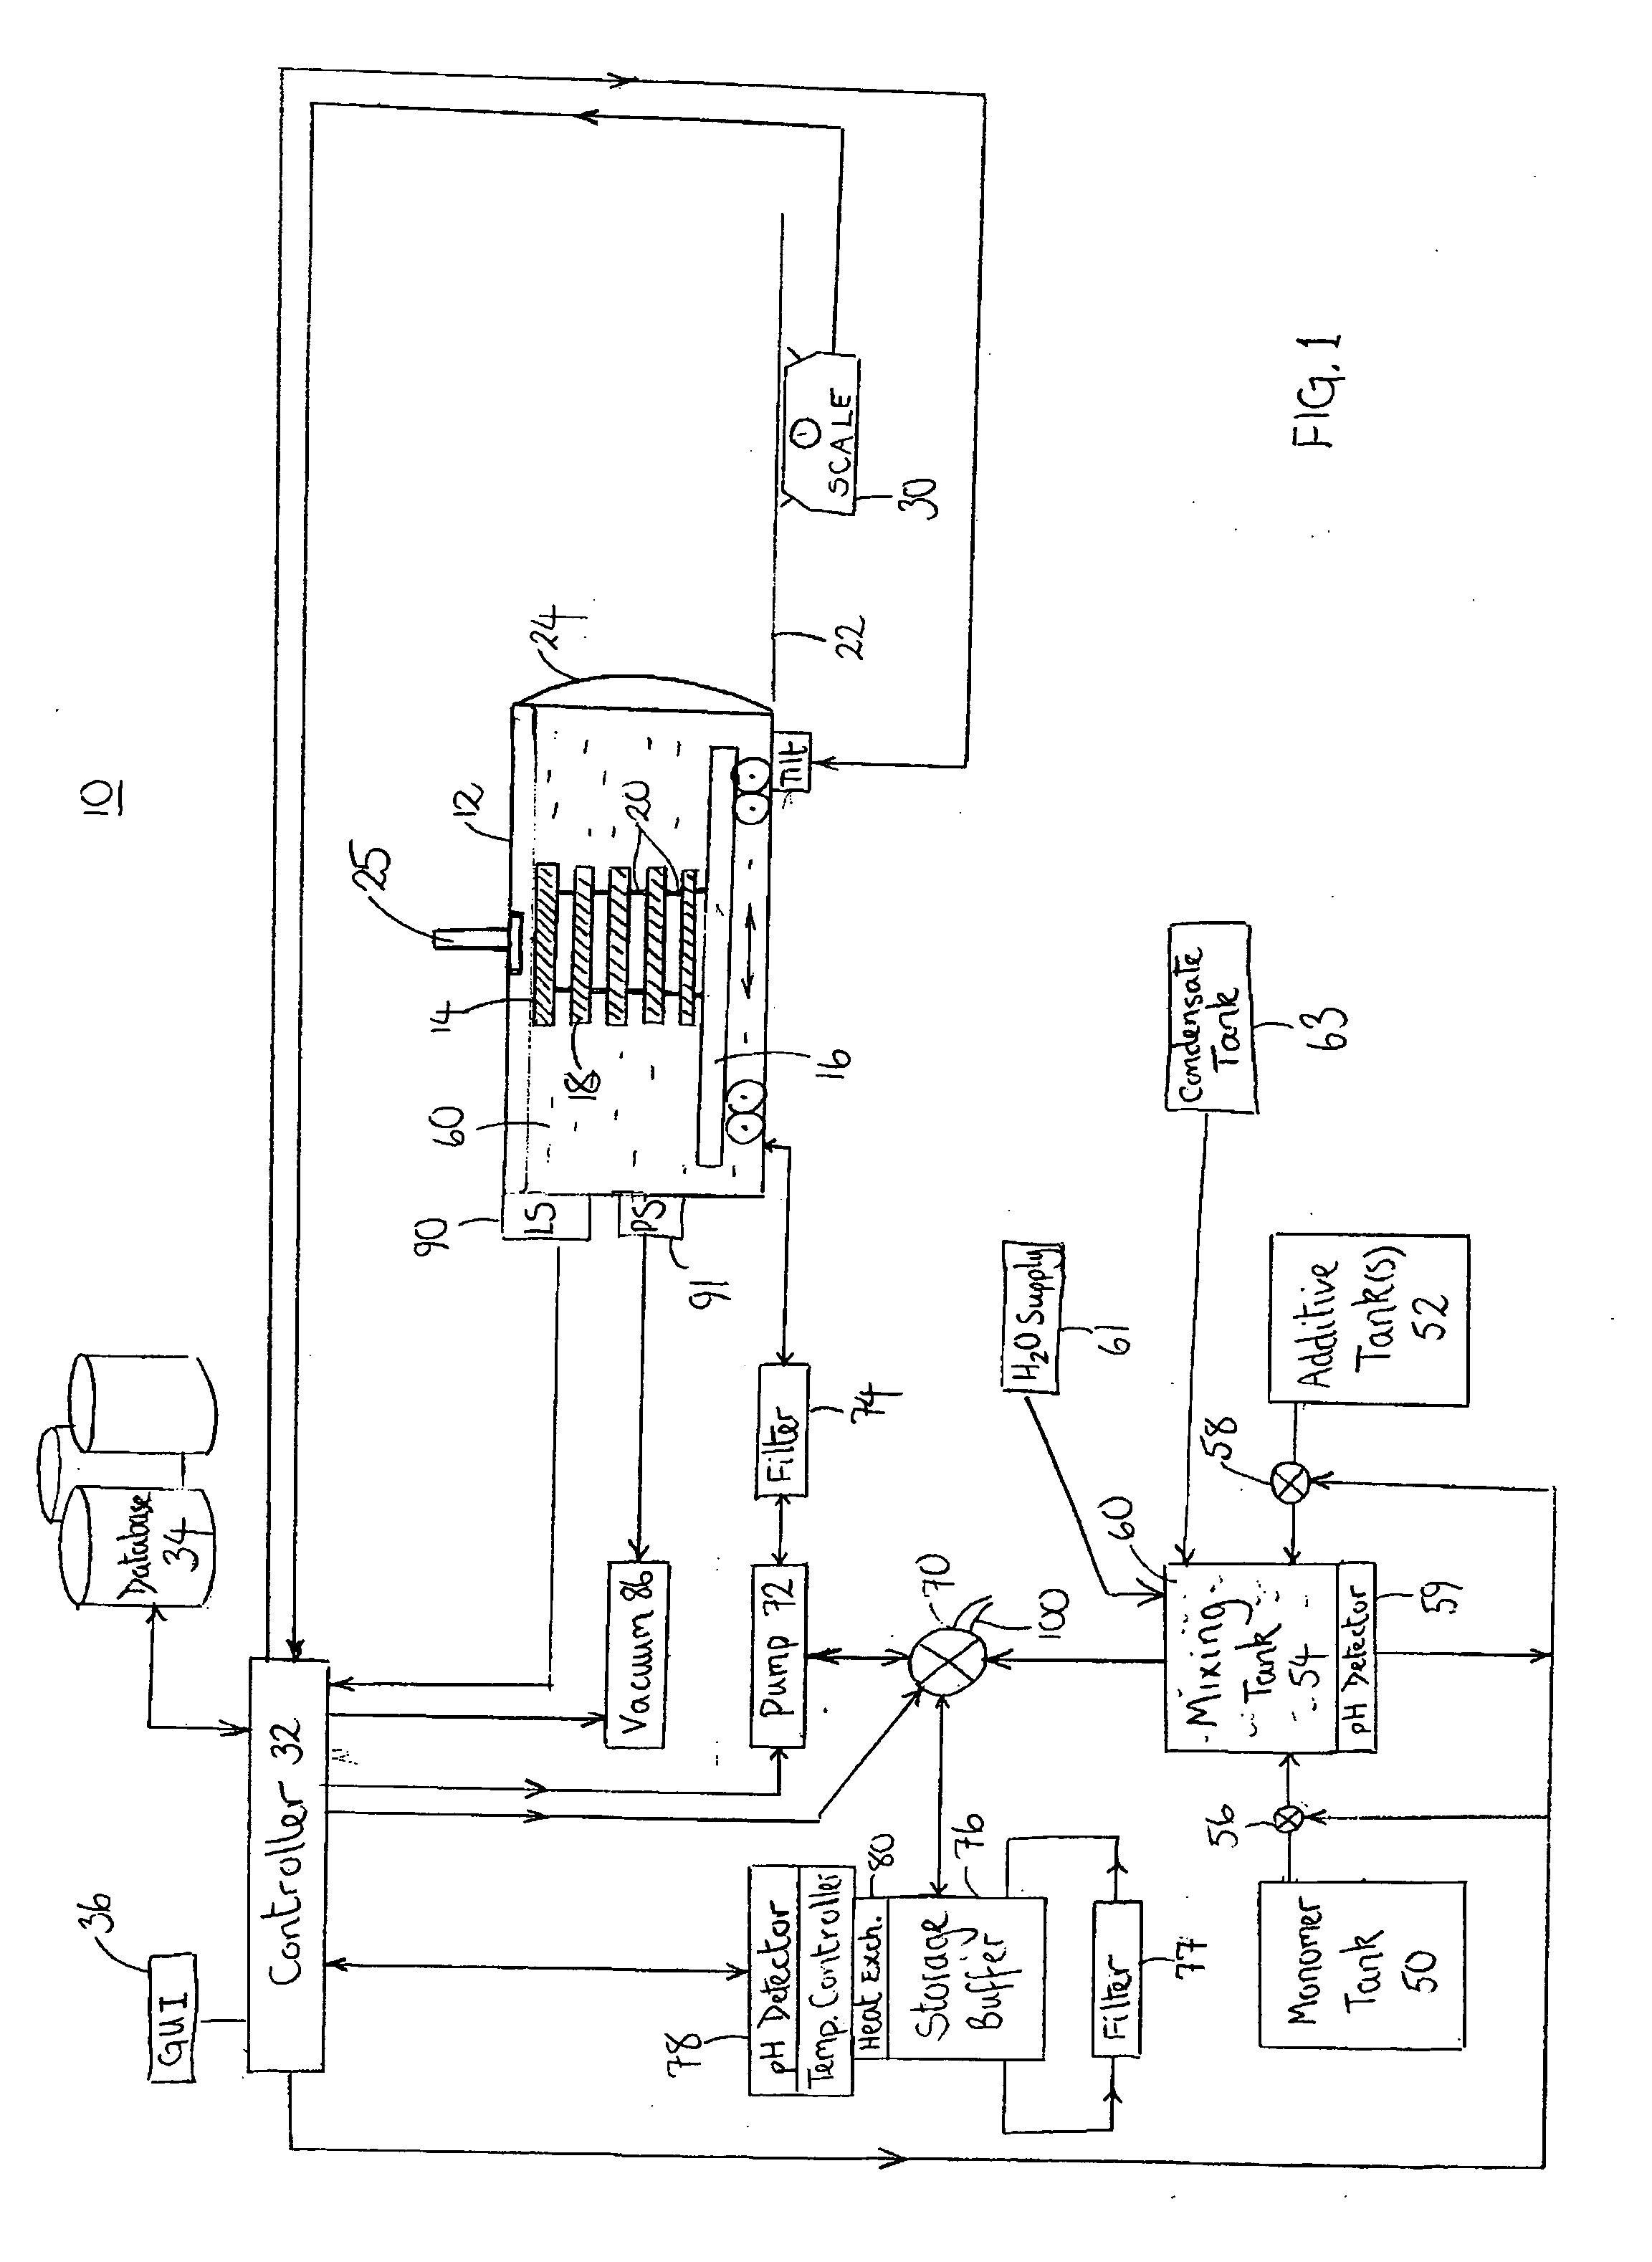 Apparatus and Operating Systems for Manufacturing Impregnated Wood